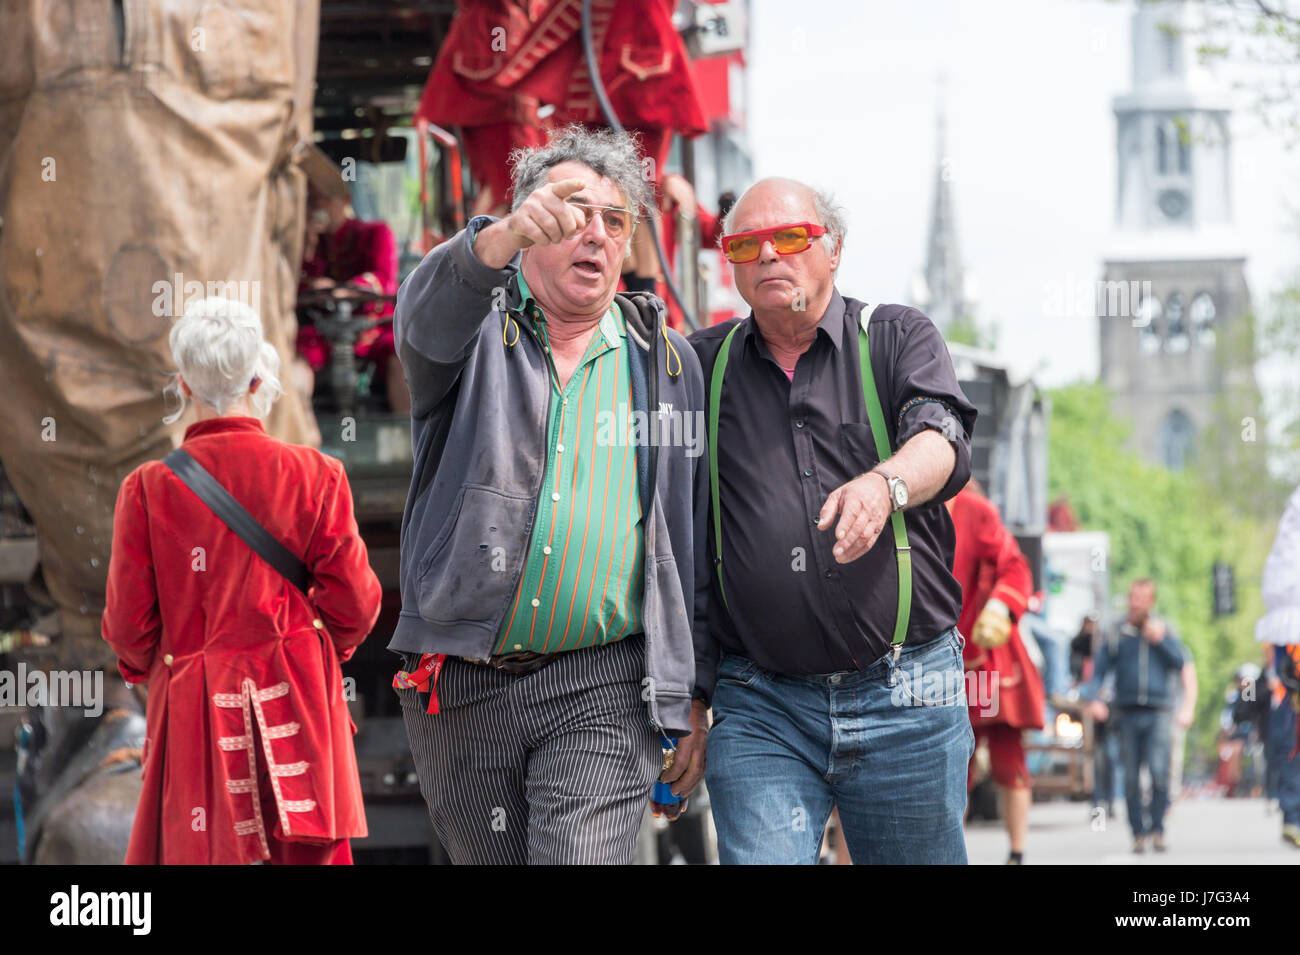 Montreal, CA - 20 May 2017: Jean Luc Courcoult, Director of Royal de Luxe Company, during 'Giants' performance Stock Photo